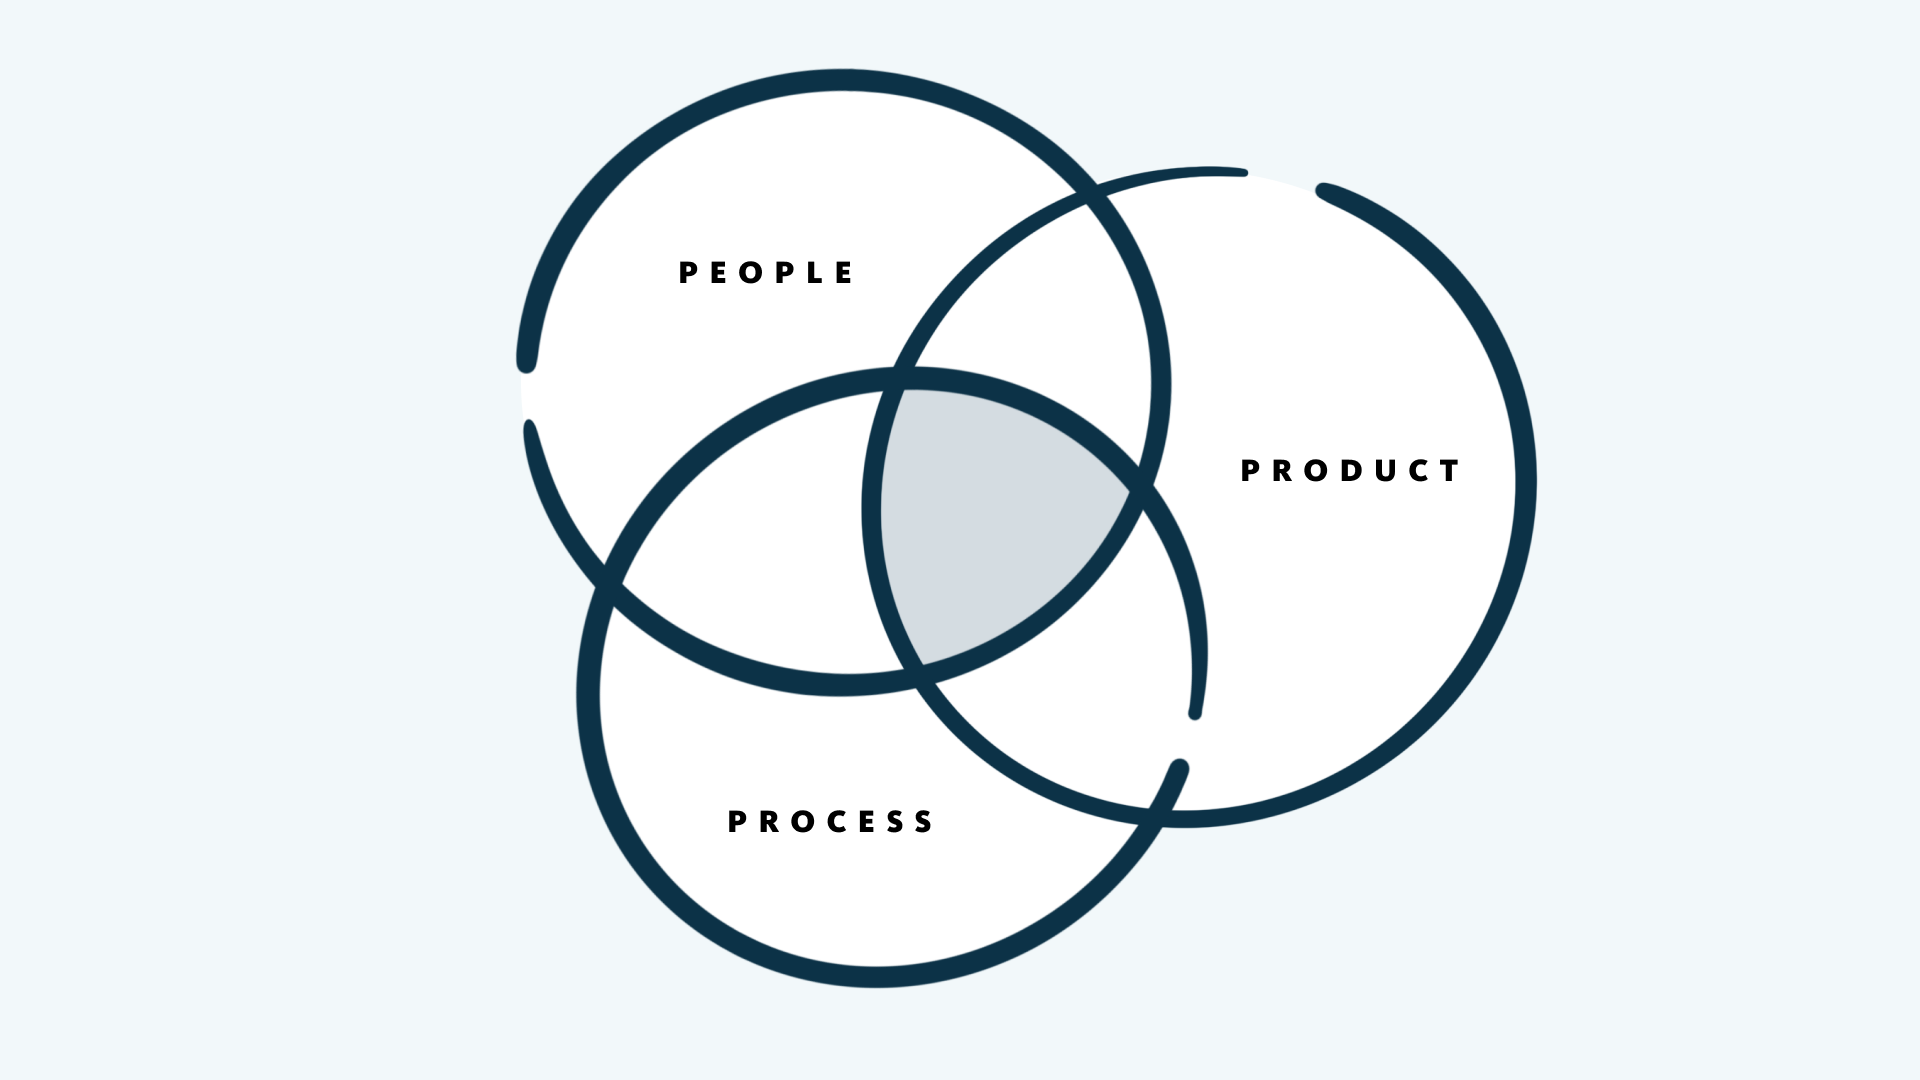 An overlapping venn diagram with people, process, and product coming together